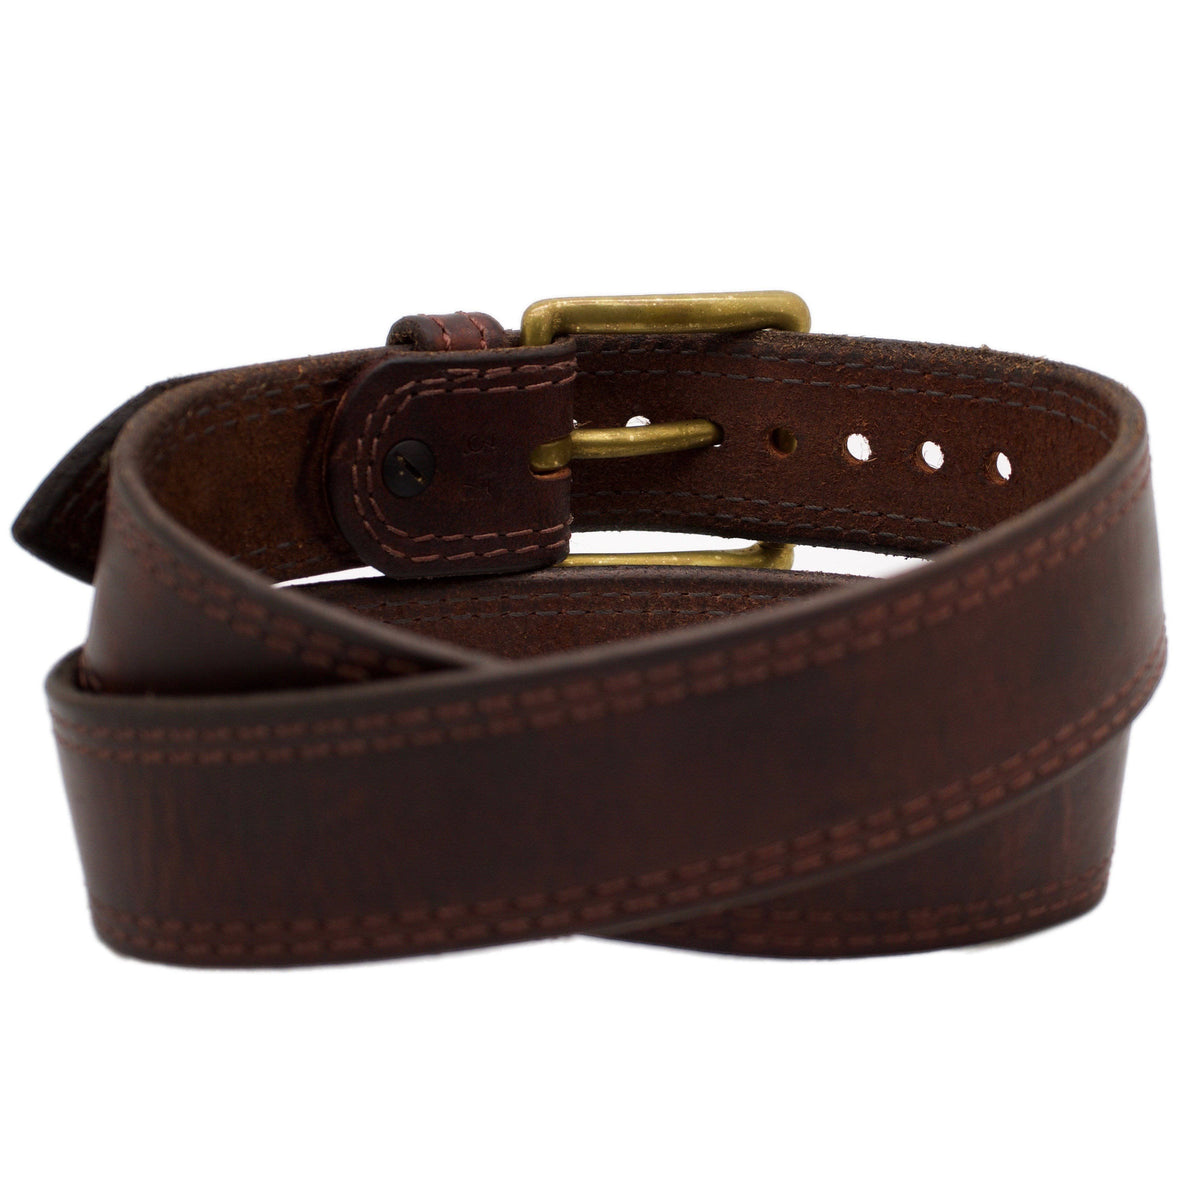 The SEQUOIA WIDE 1.75 Leather Belt